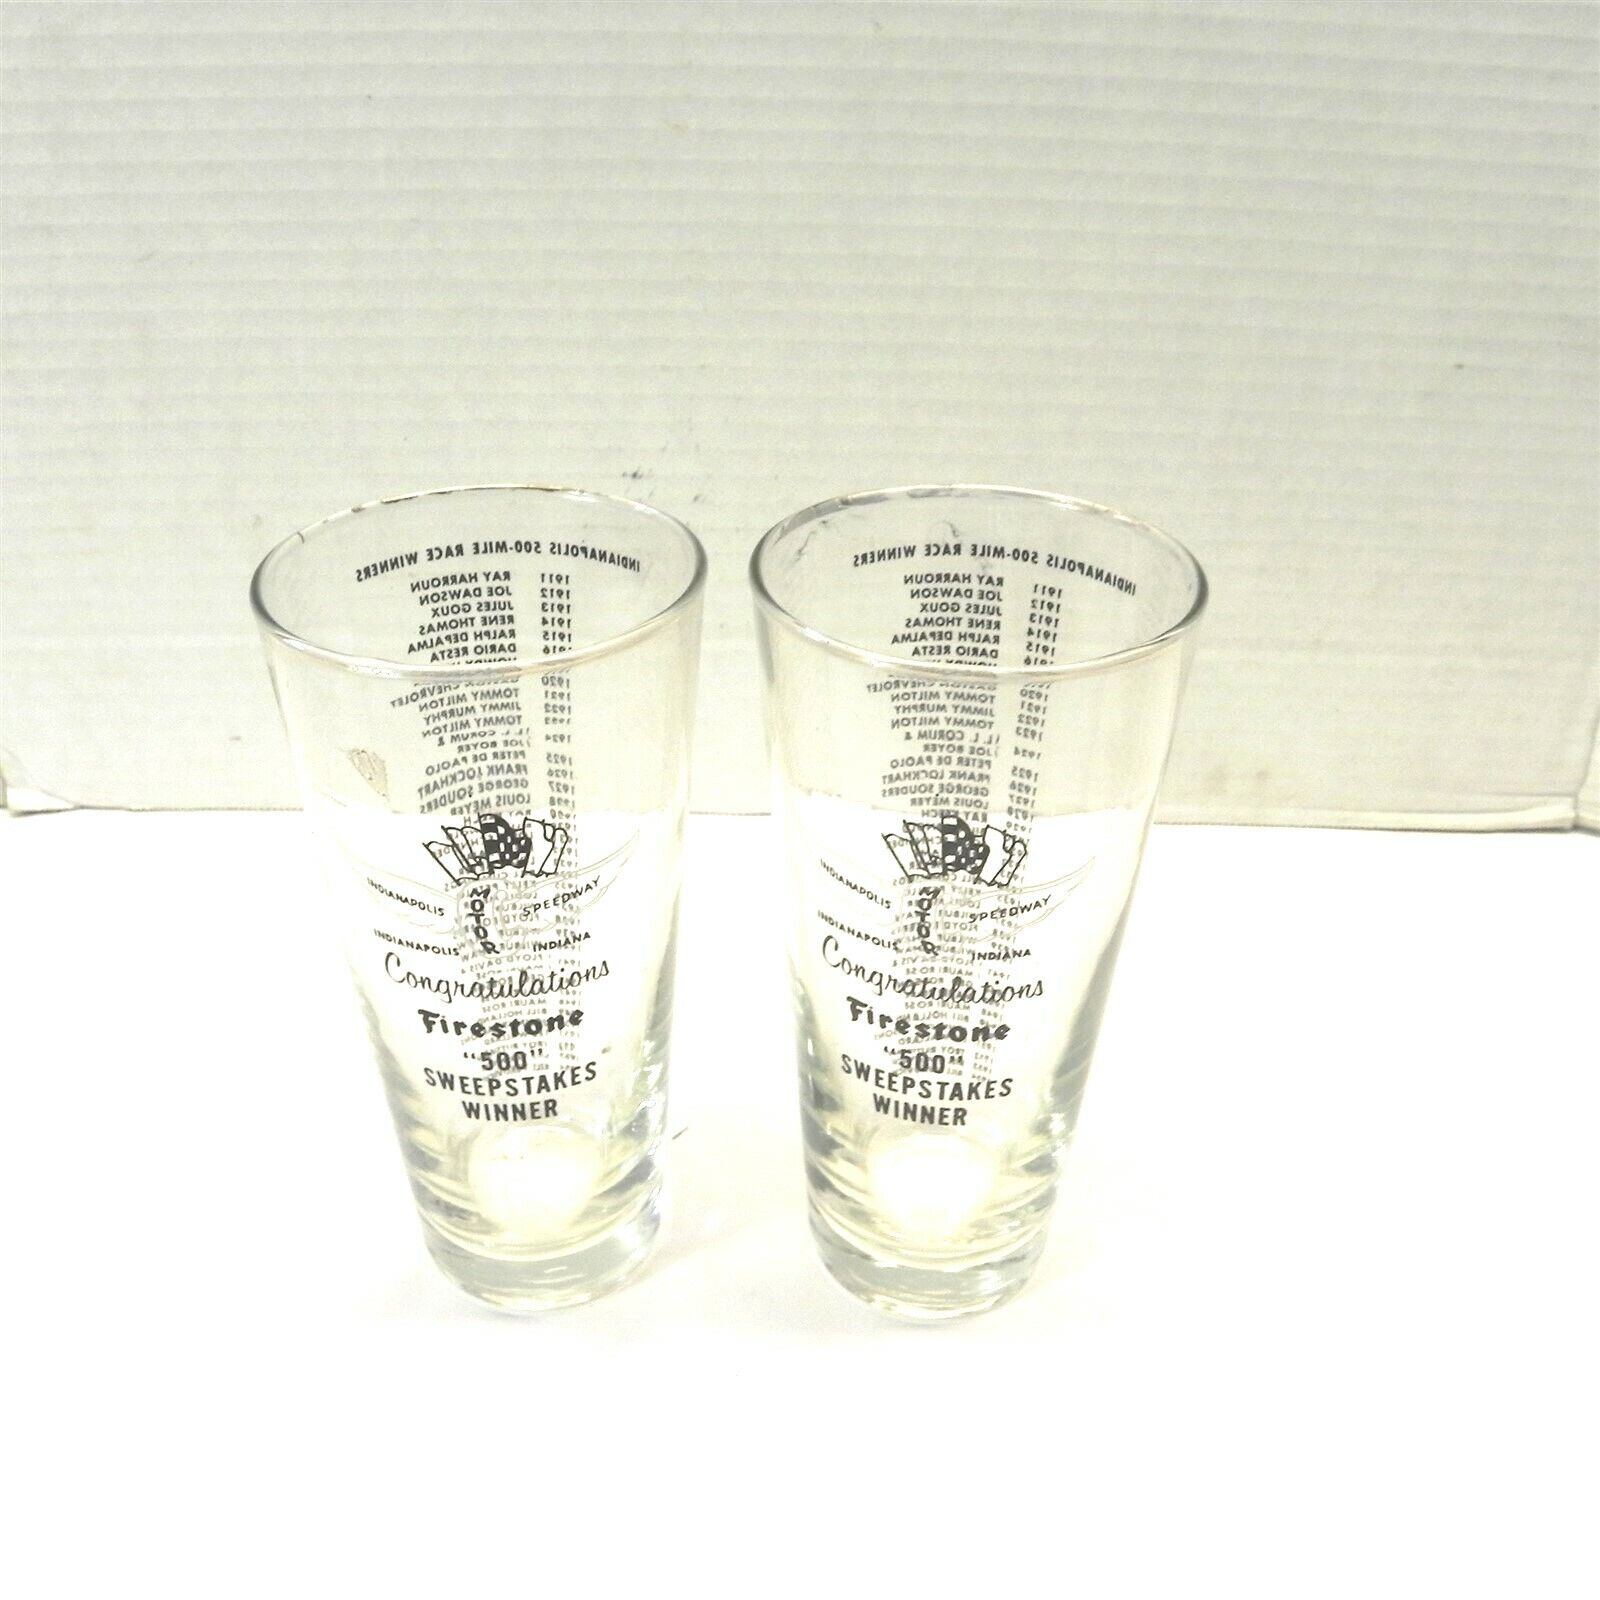 VINTAGE RARE 1954 INDIANAPOLIS SPEEDWAY 500 SWEEPSTAKES WINNER GLASS CUP SET 